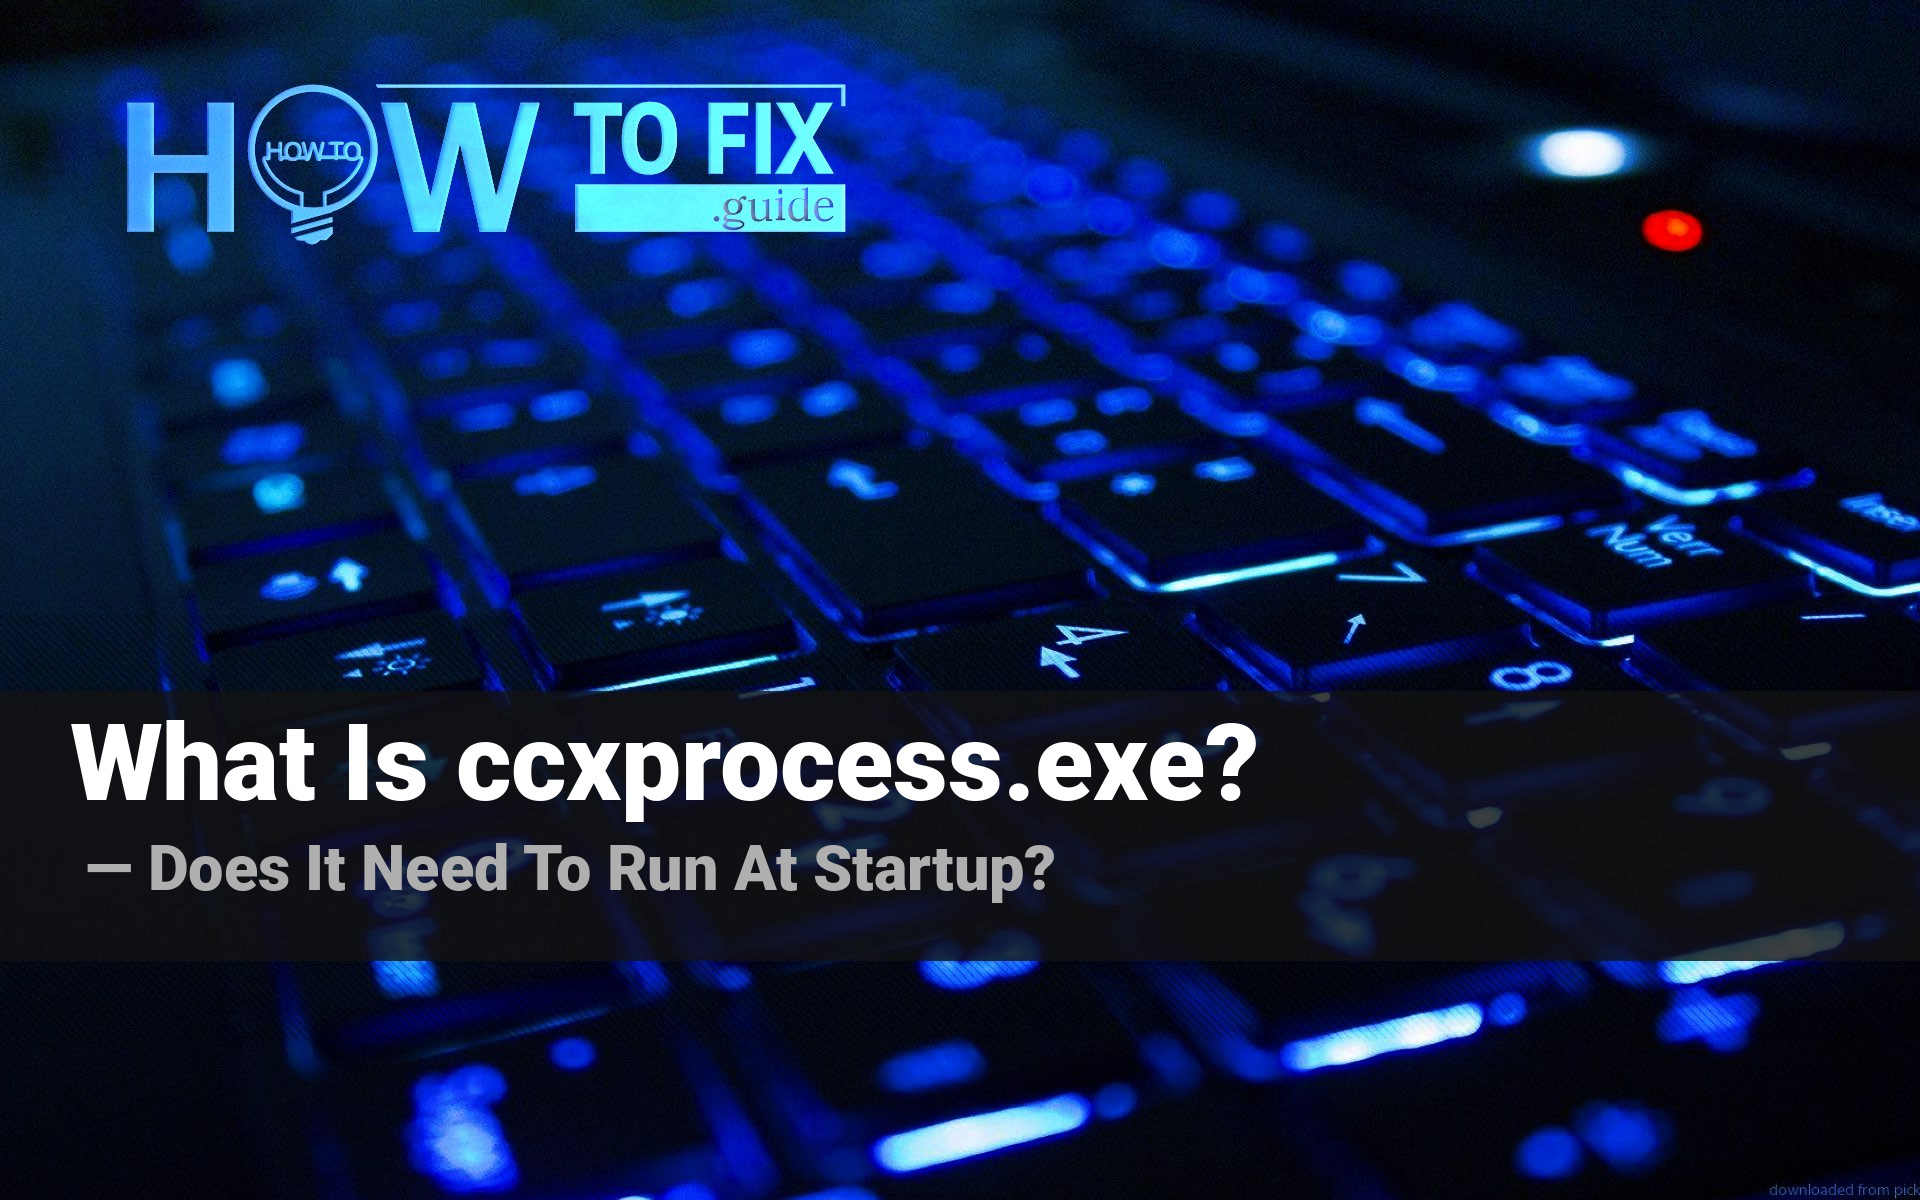 CCXProcess.exe: What is it and Does it Need to Run at Startup?